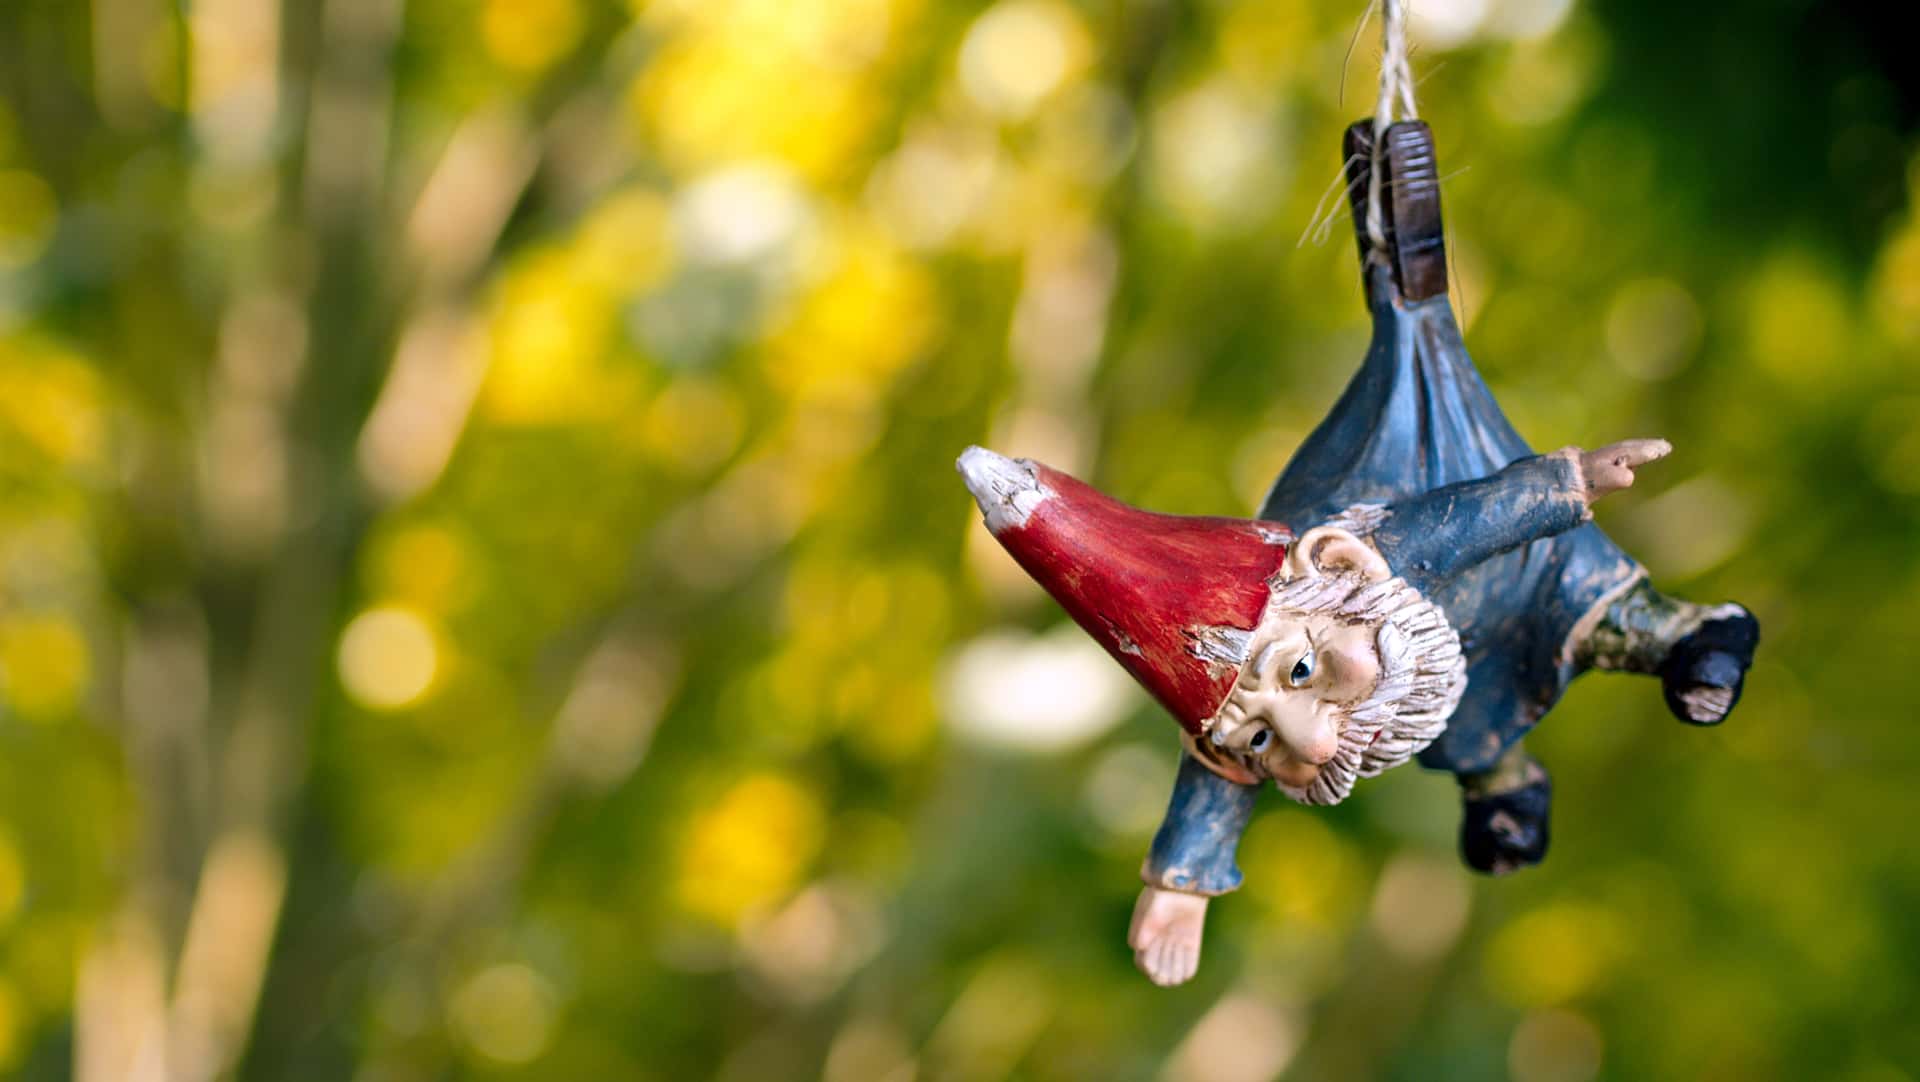 garden gnome suspended by a clothespin